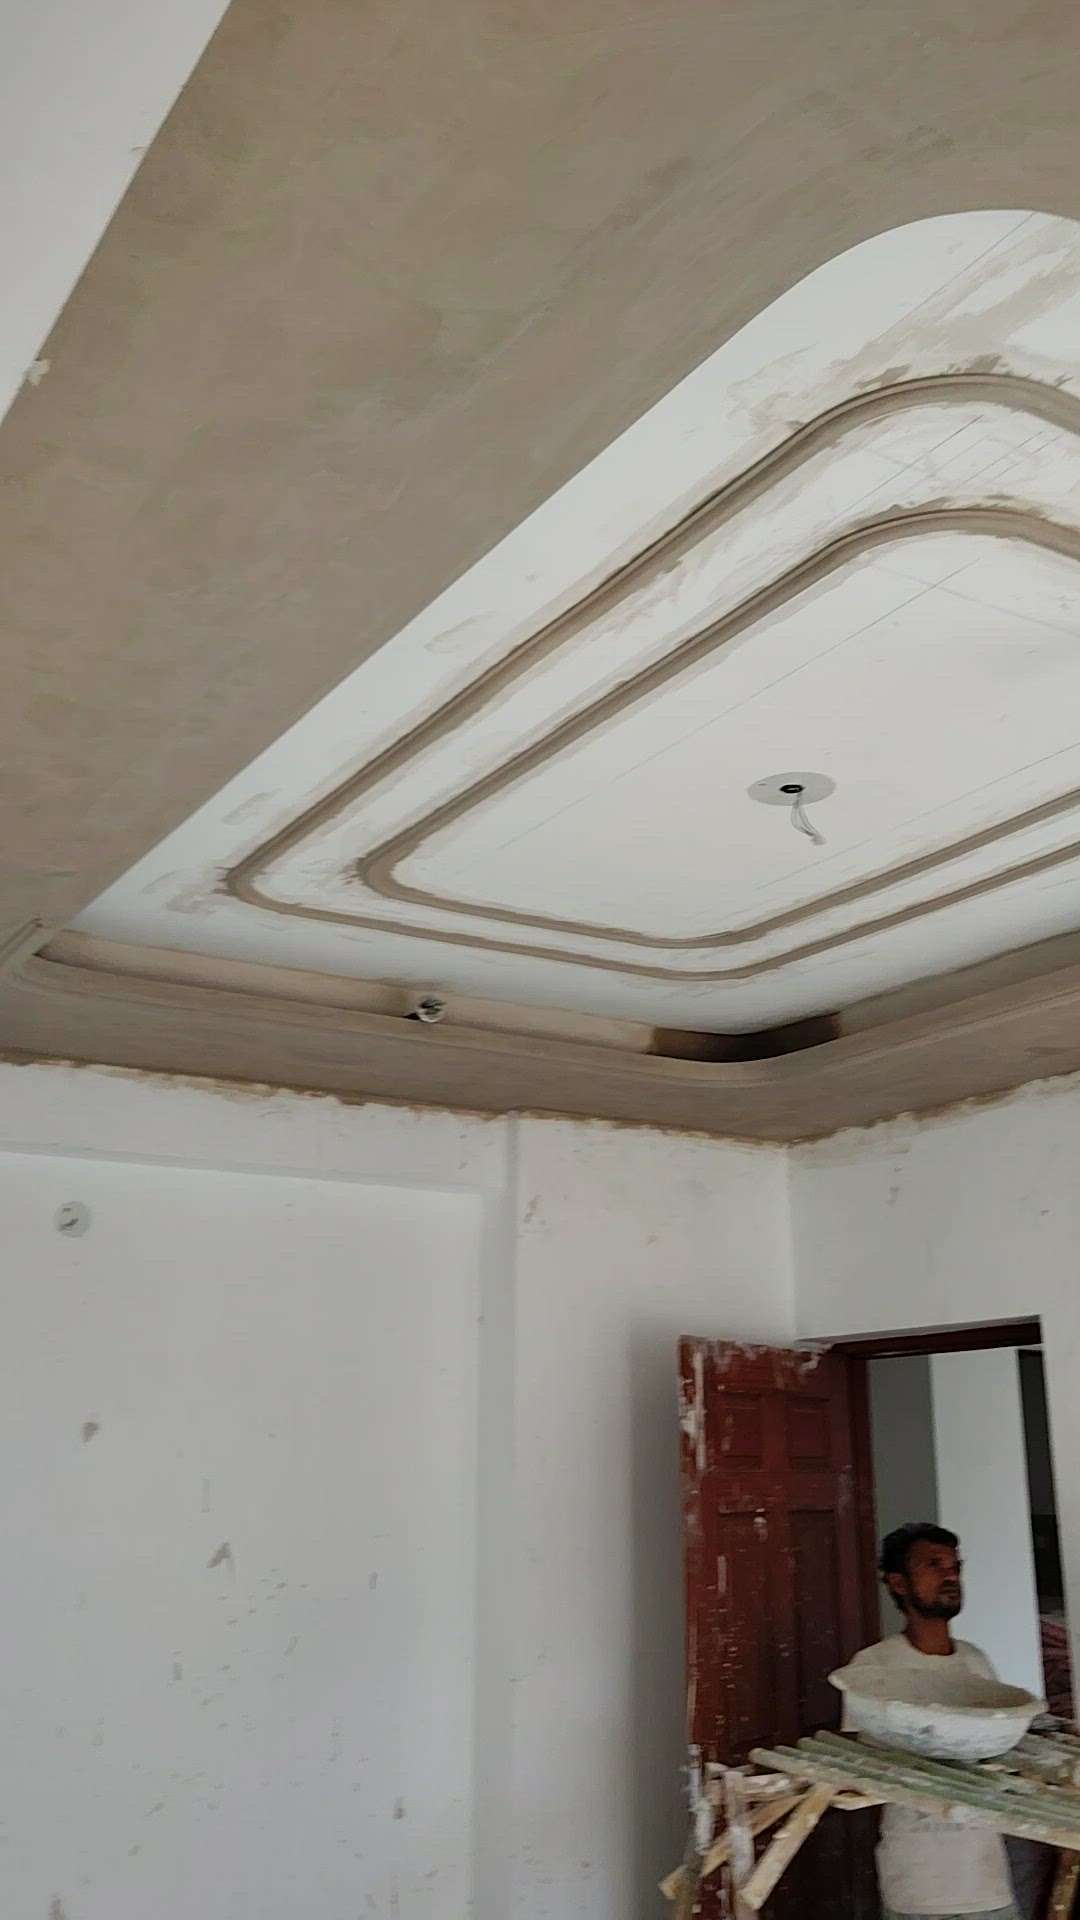 We provide excellent quality of all kind of wooden work like modular kitchen, Entrance panelling,tv unit,vanity, wordrobe etc.
And also doing paint work,glass & mirror, wooden flooring,Tiel, plumbing work in Gr Noida, Ghaziabad, Delhi.......













#falseceiling #interiordesign #interior #interiors #architecture #falseceilingdesign #ceilingdesign #decor #homedecor #interiordesigner #construction #modularkitchen #design #interiordecorating #designer #realestate #bedroom #ceiling #anchorfasteners #sstactile #stainlesssteelcompositepanels #tunnelsegmentbolts #canonsundreaminfra #architect #scp #sundreamgroup #commercialbusinessparks #cladding #canonfasteners #instagram